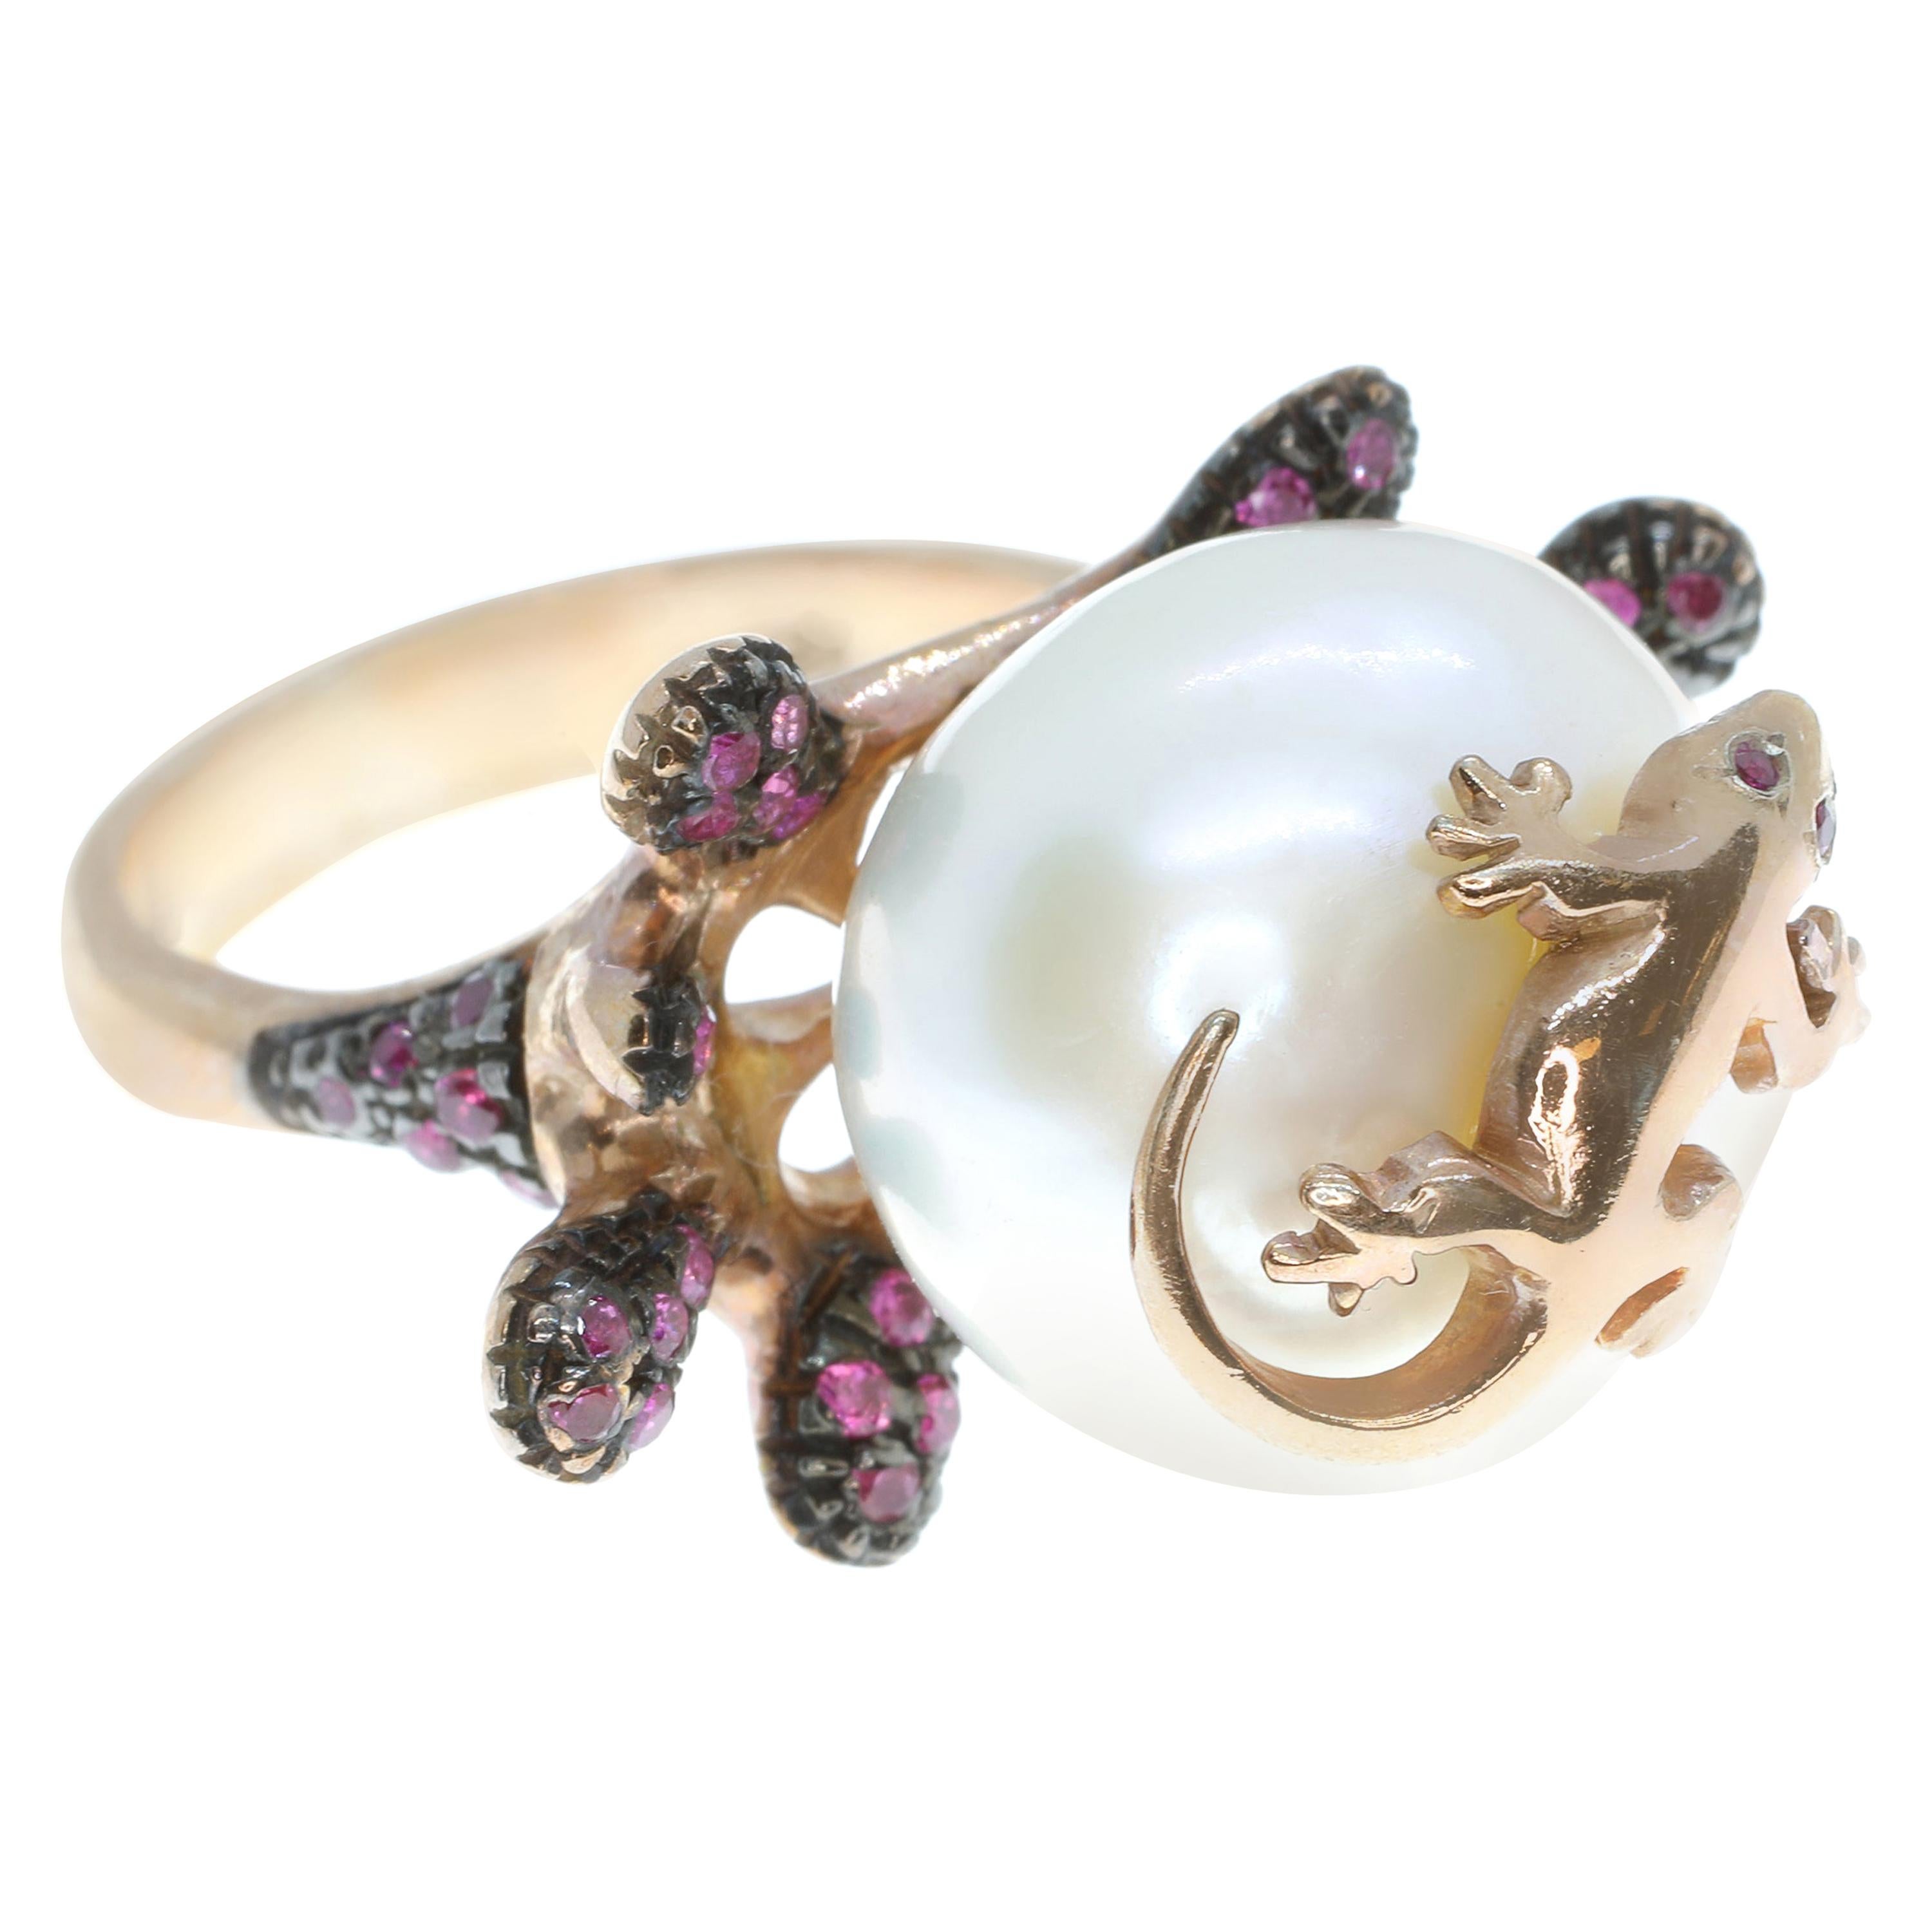 21st Century 925 Silver with Cultured Pearl Cubic Zirconia and Lizard Ring